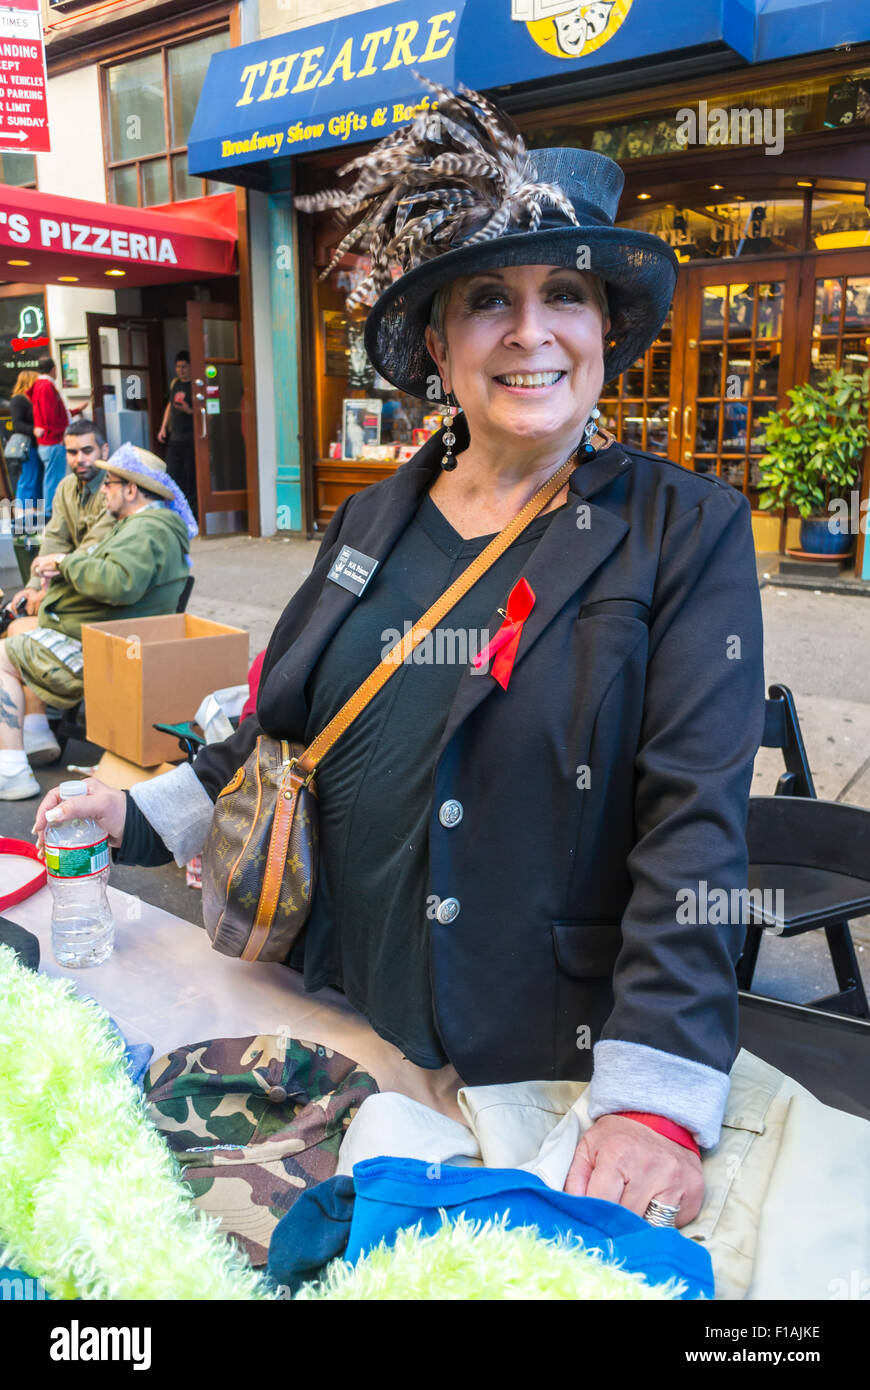 New York City, USA, Portrait WOman Street Vendor, Smiling with Hat in Hell's Kitchen, Theater Neighborhood, District, Flea Market Stock Photo